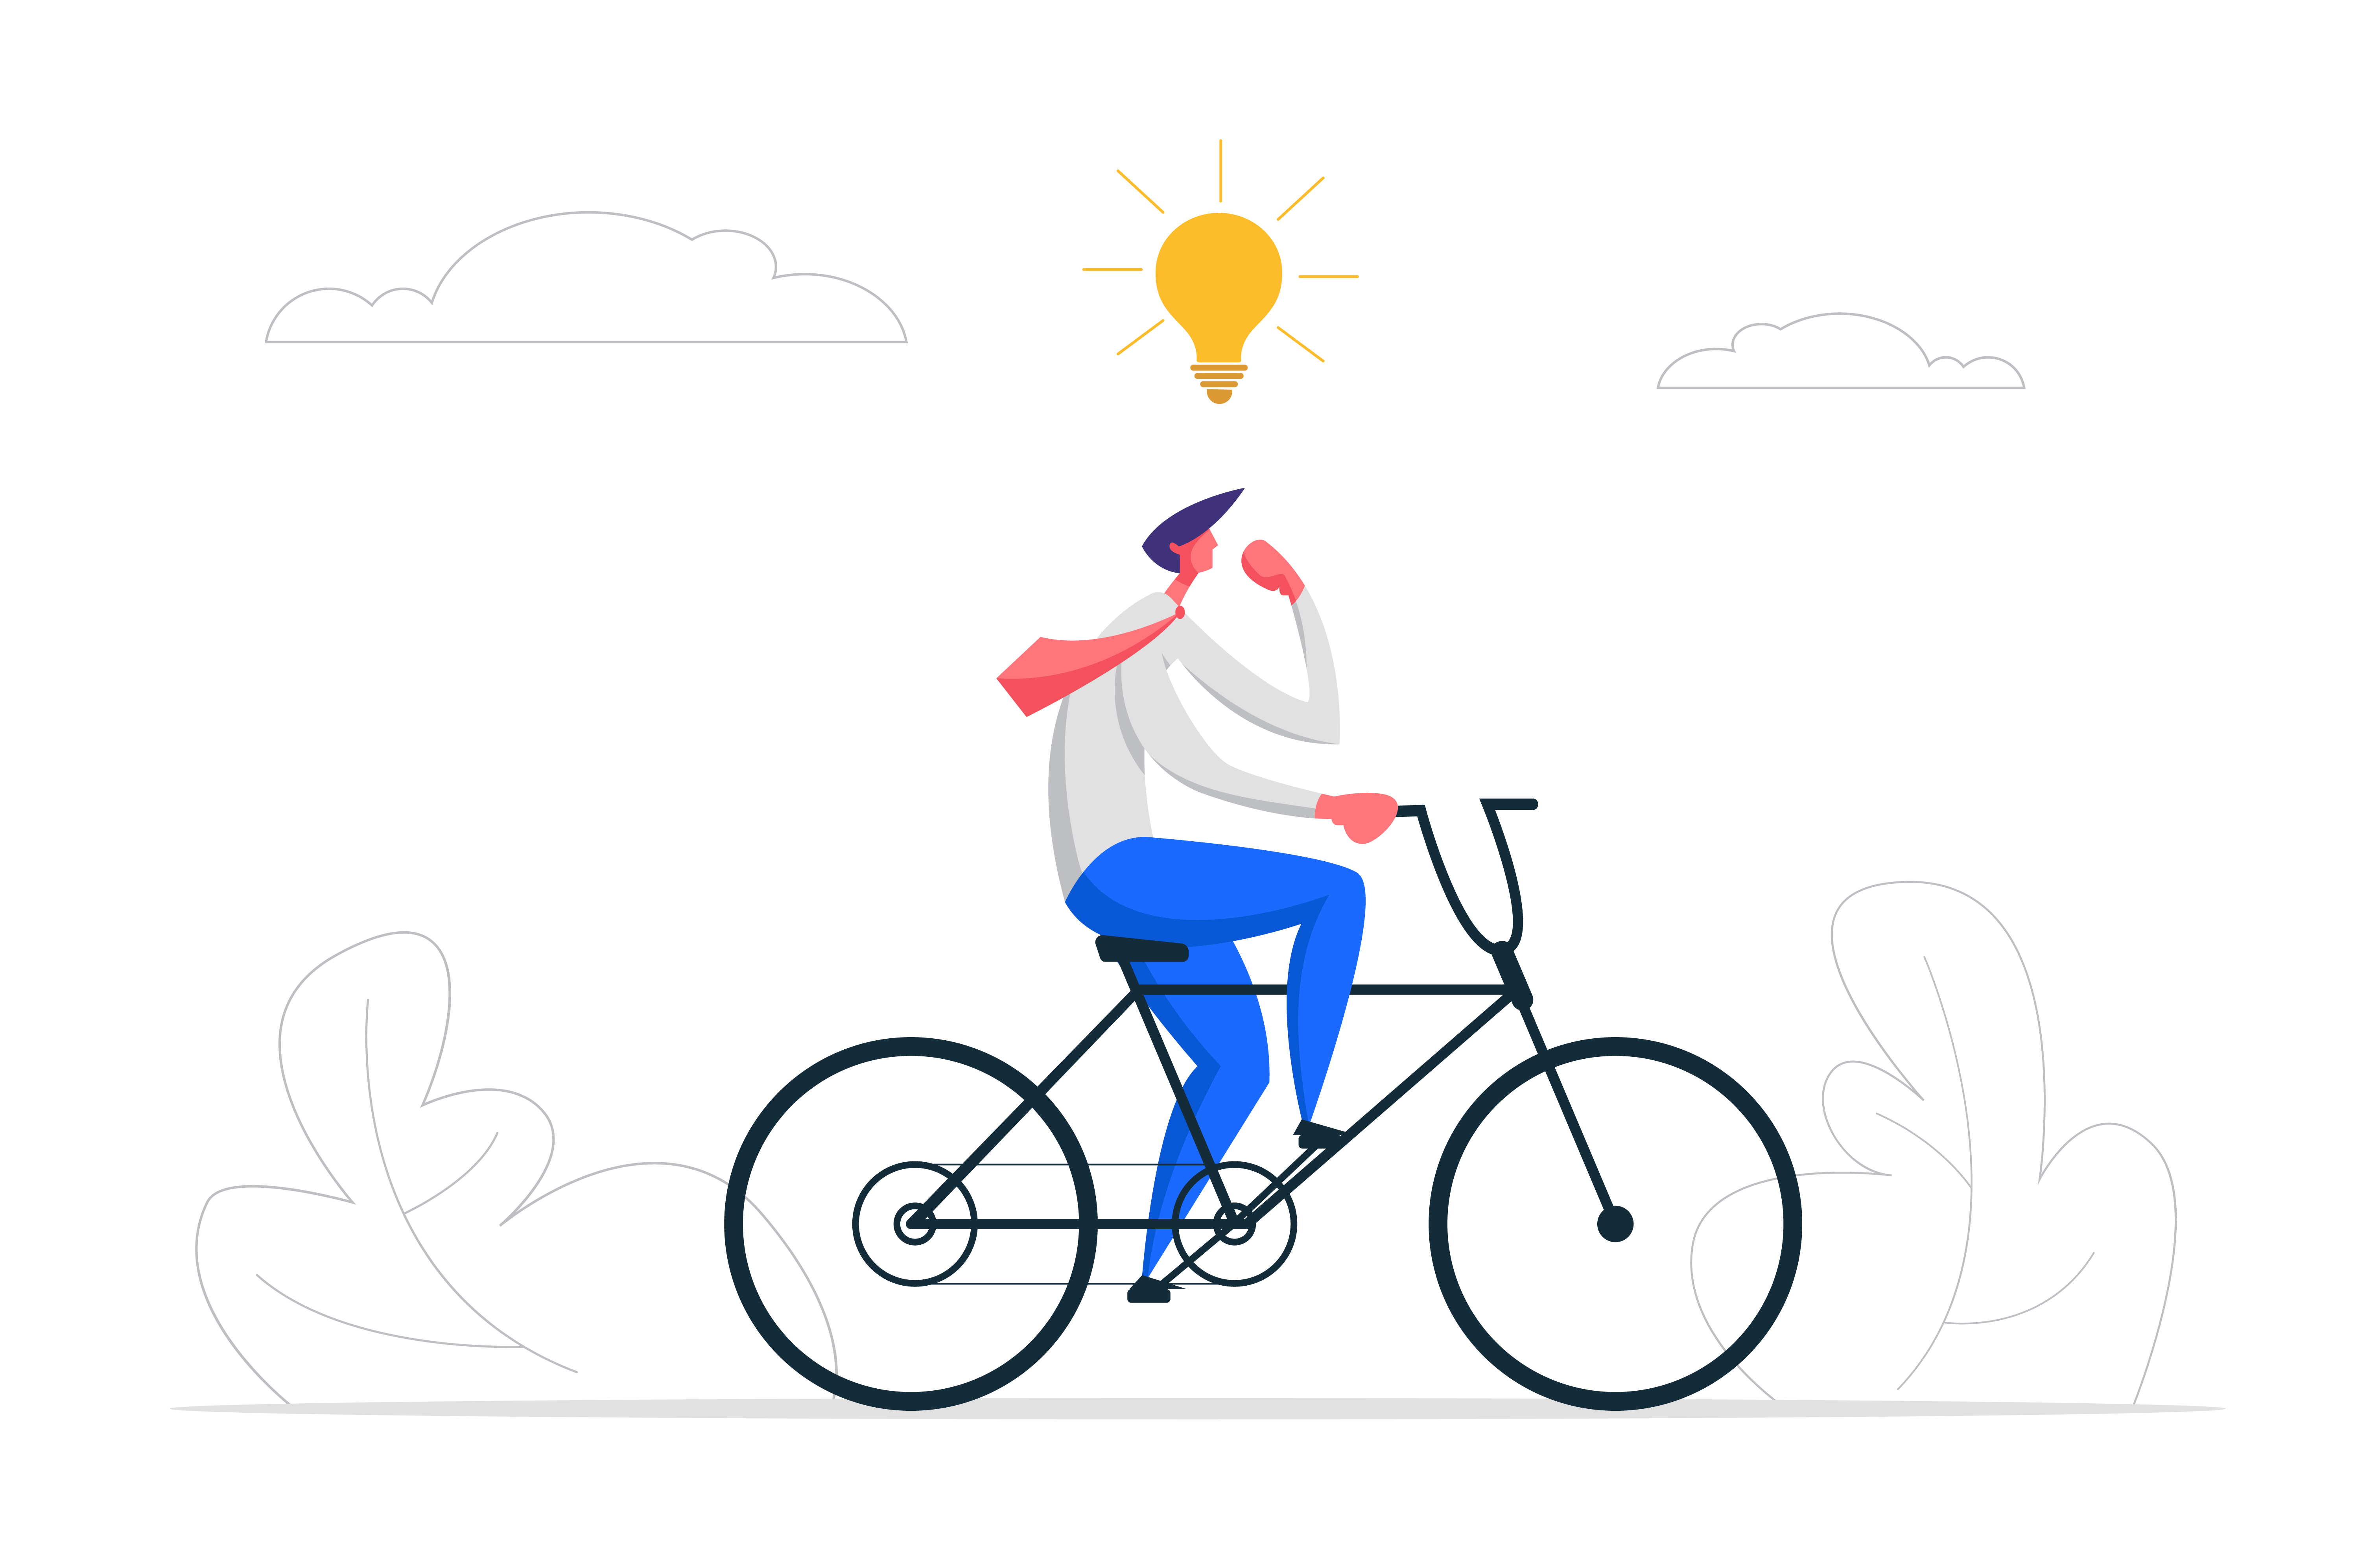 Creative Solutions Business Concept with Businessman Character on a bike Getting Idea as a Lightbulb. Symbol of Out of the Box Thinking, Brainstorming, New Idea, Innovation, Success. Vector cartoon illustration